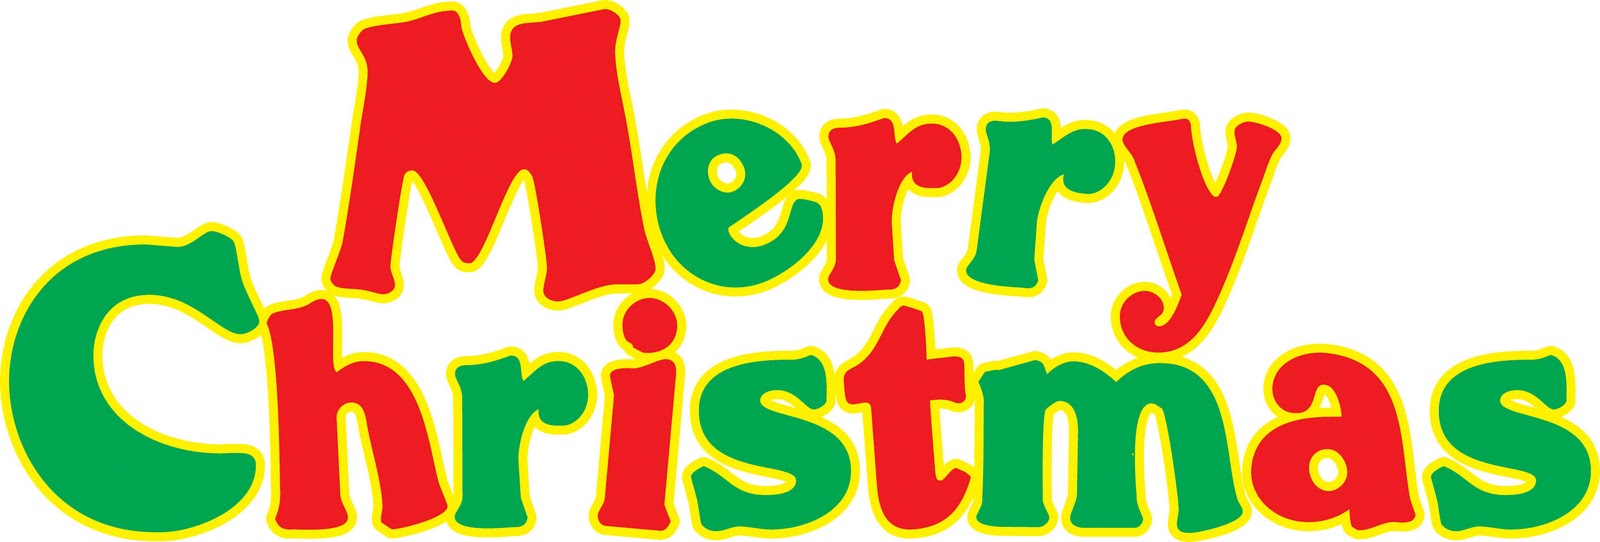 merry christmas banner clipar - Merry Christmas Clipart Images